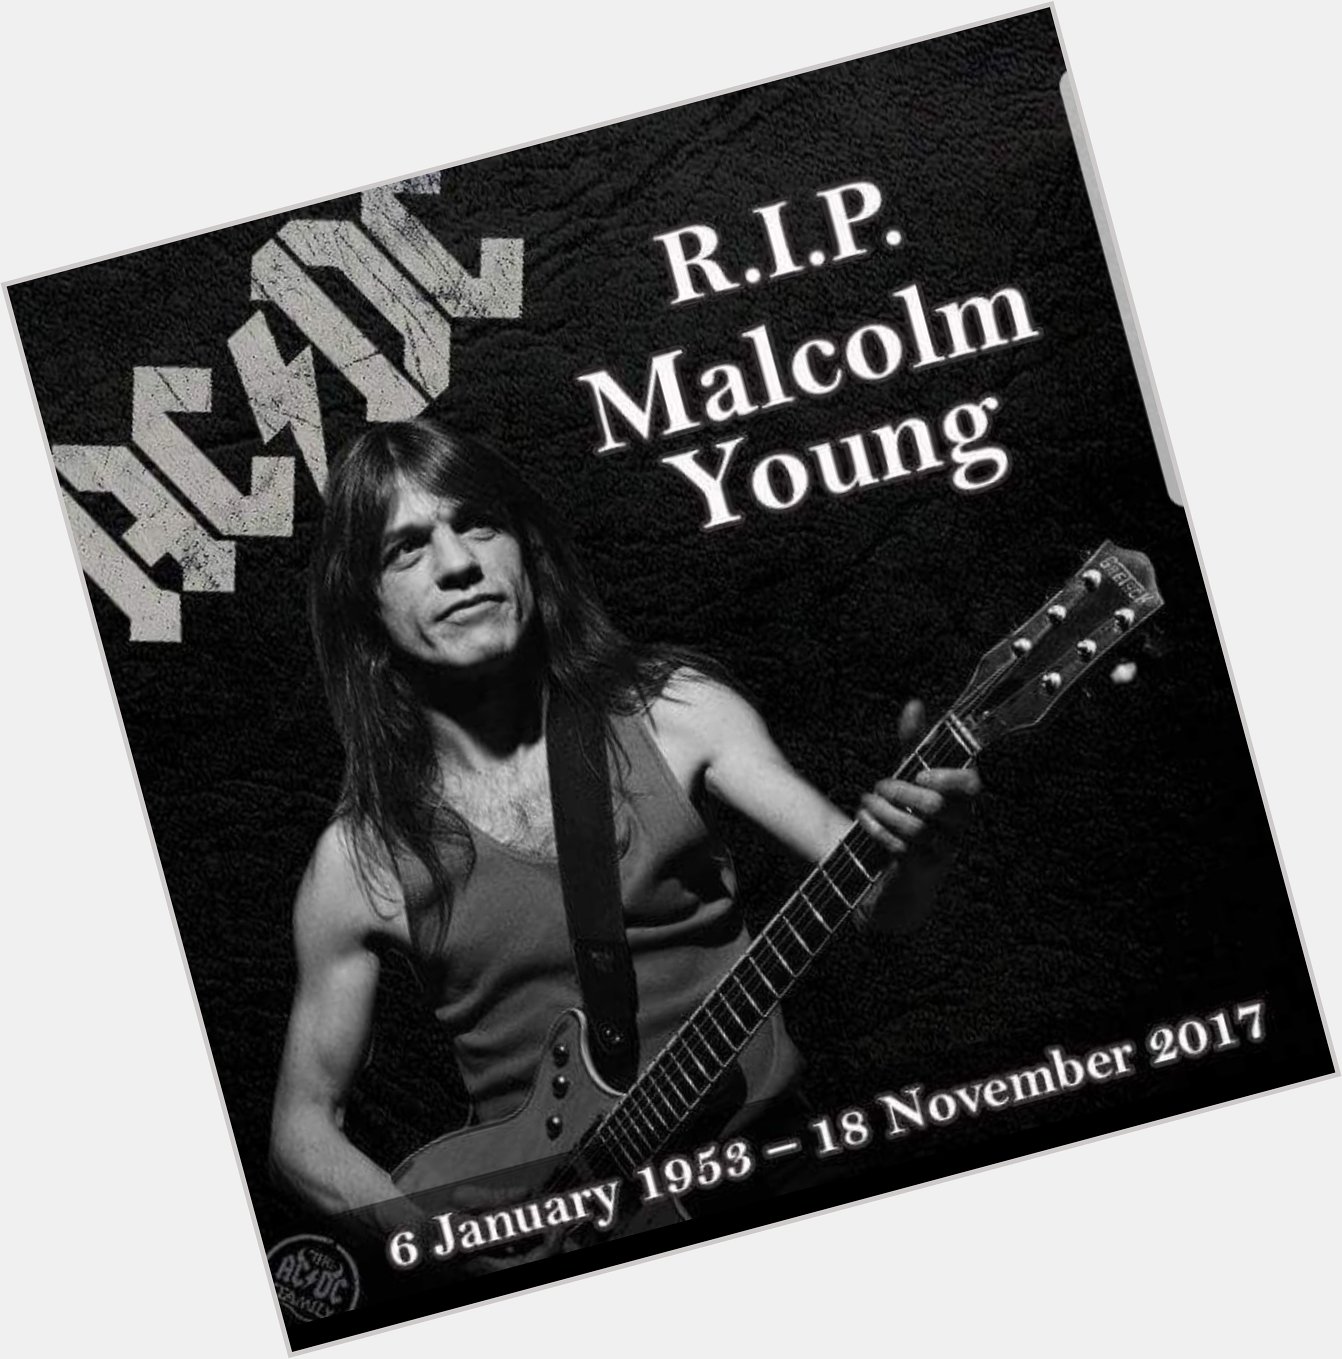 Rest in peace Malcolm young a legend & riff master happy birthday 